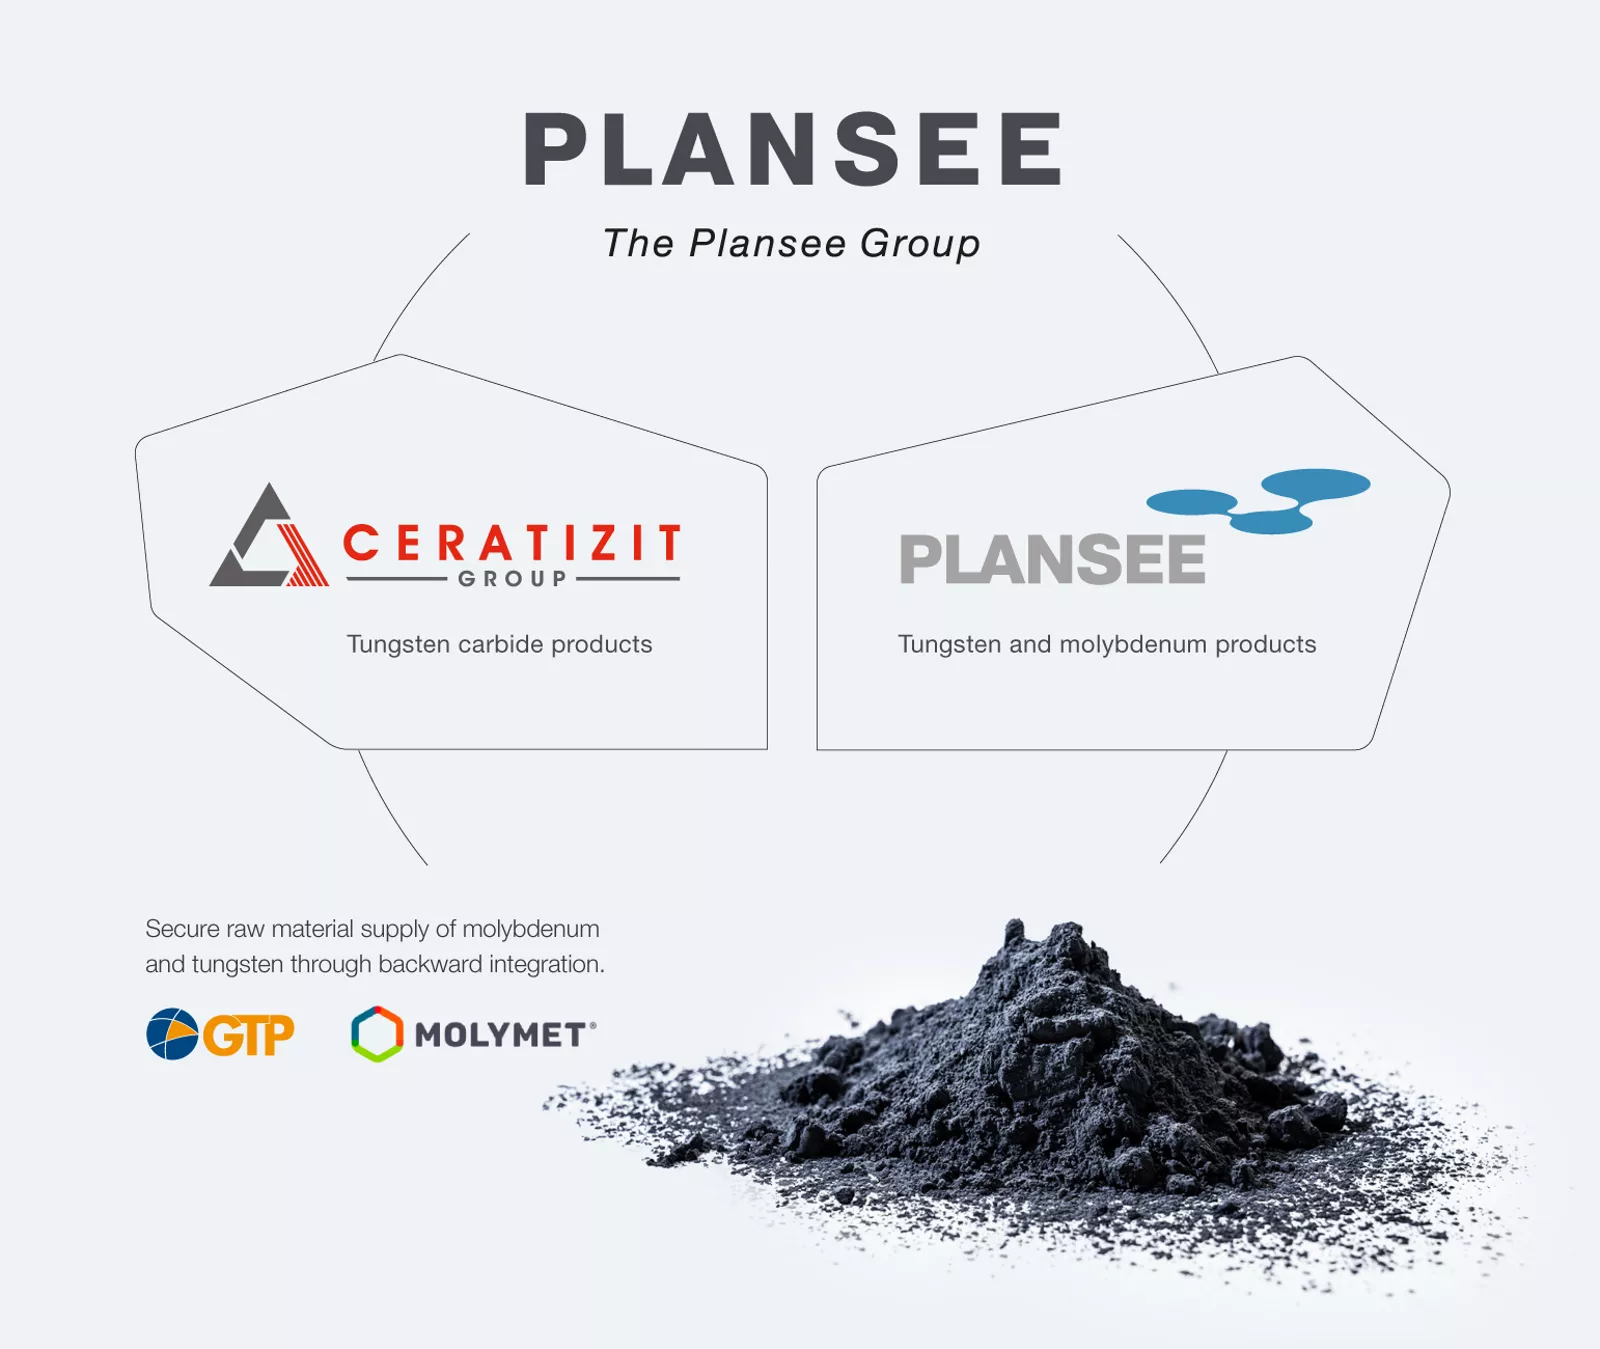 Portefeuille du groupe Plansee Organigramme